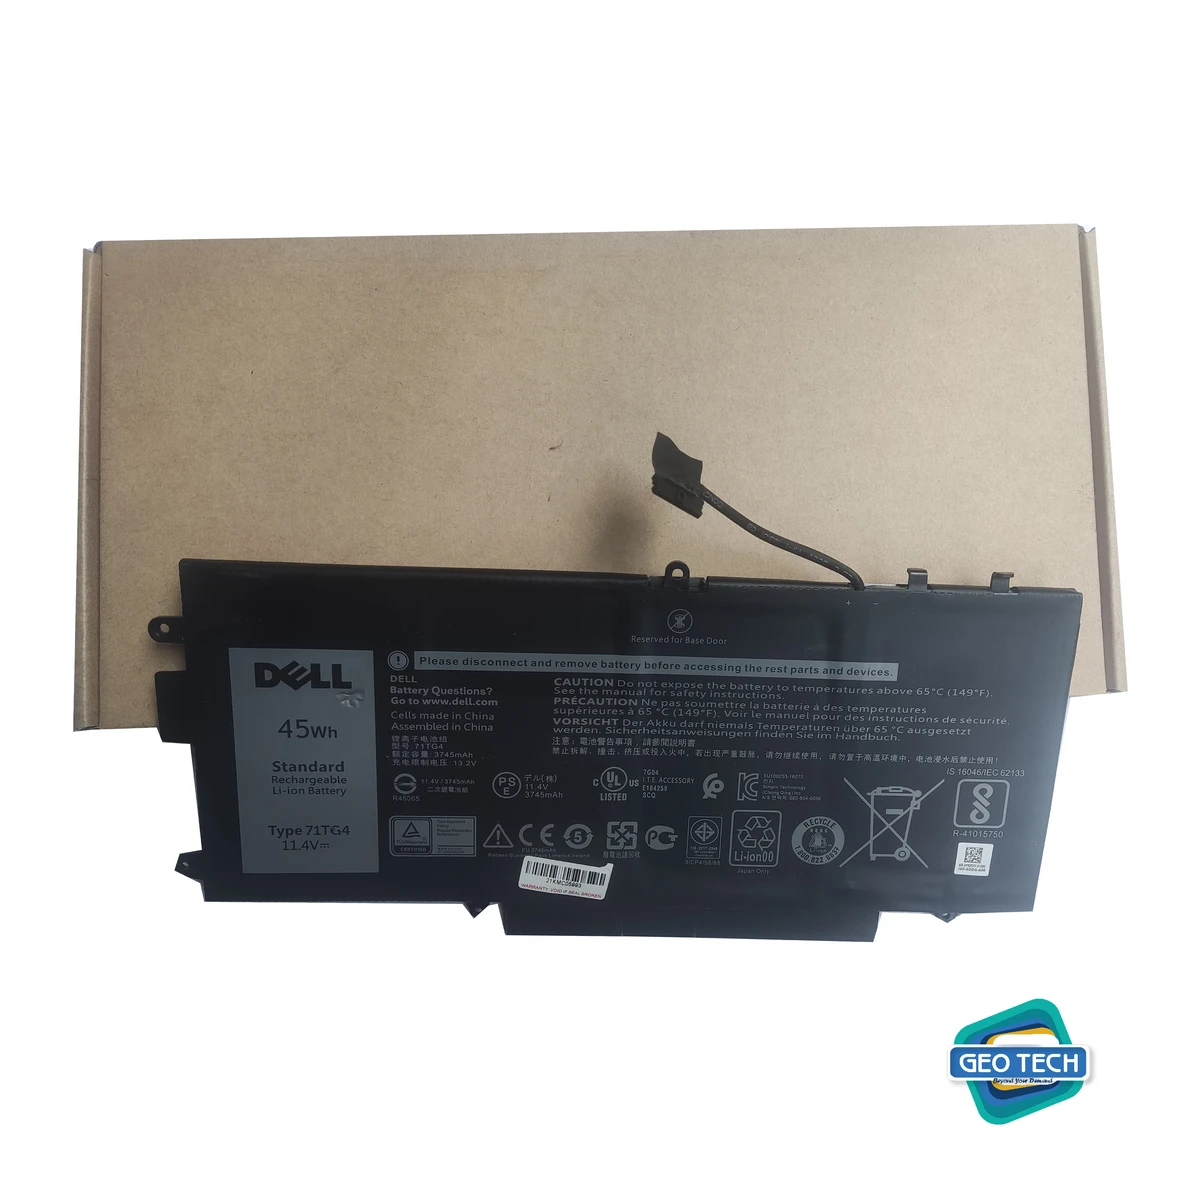 RDSJ 71TG4 X49C1 K5XWW Laptop Battery for Dell Latitude 5289 7389 P29S001 7390 P29S002 2-in-1 Series 071TG4 0K5XWW 0X49C1 CFX97 0CFX97 7ITG4 6CYH6 725KY N18GG 07ITG4 11.4V 45Wh